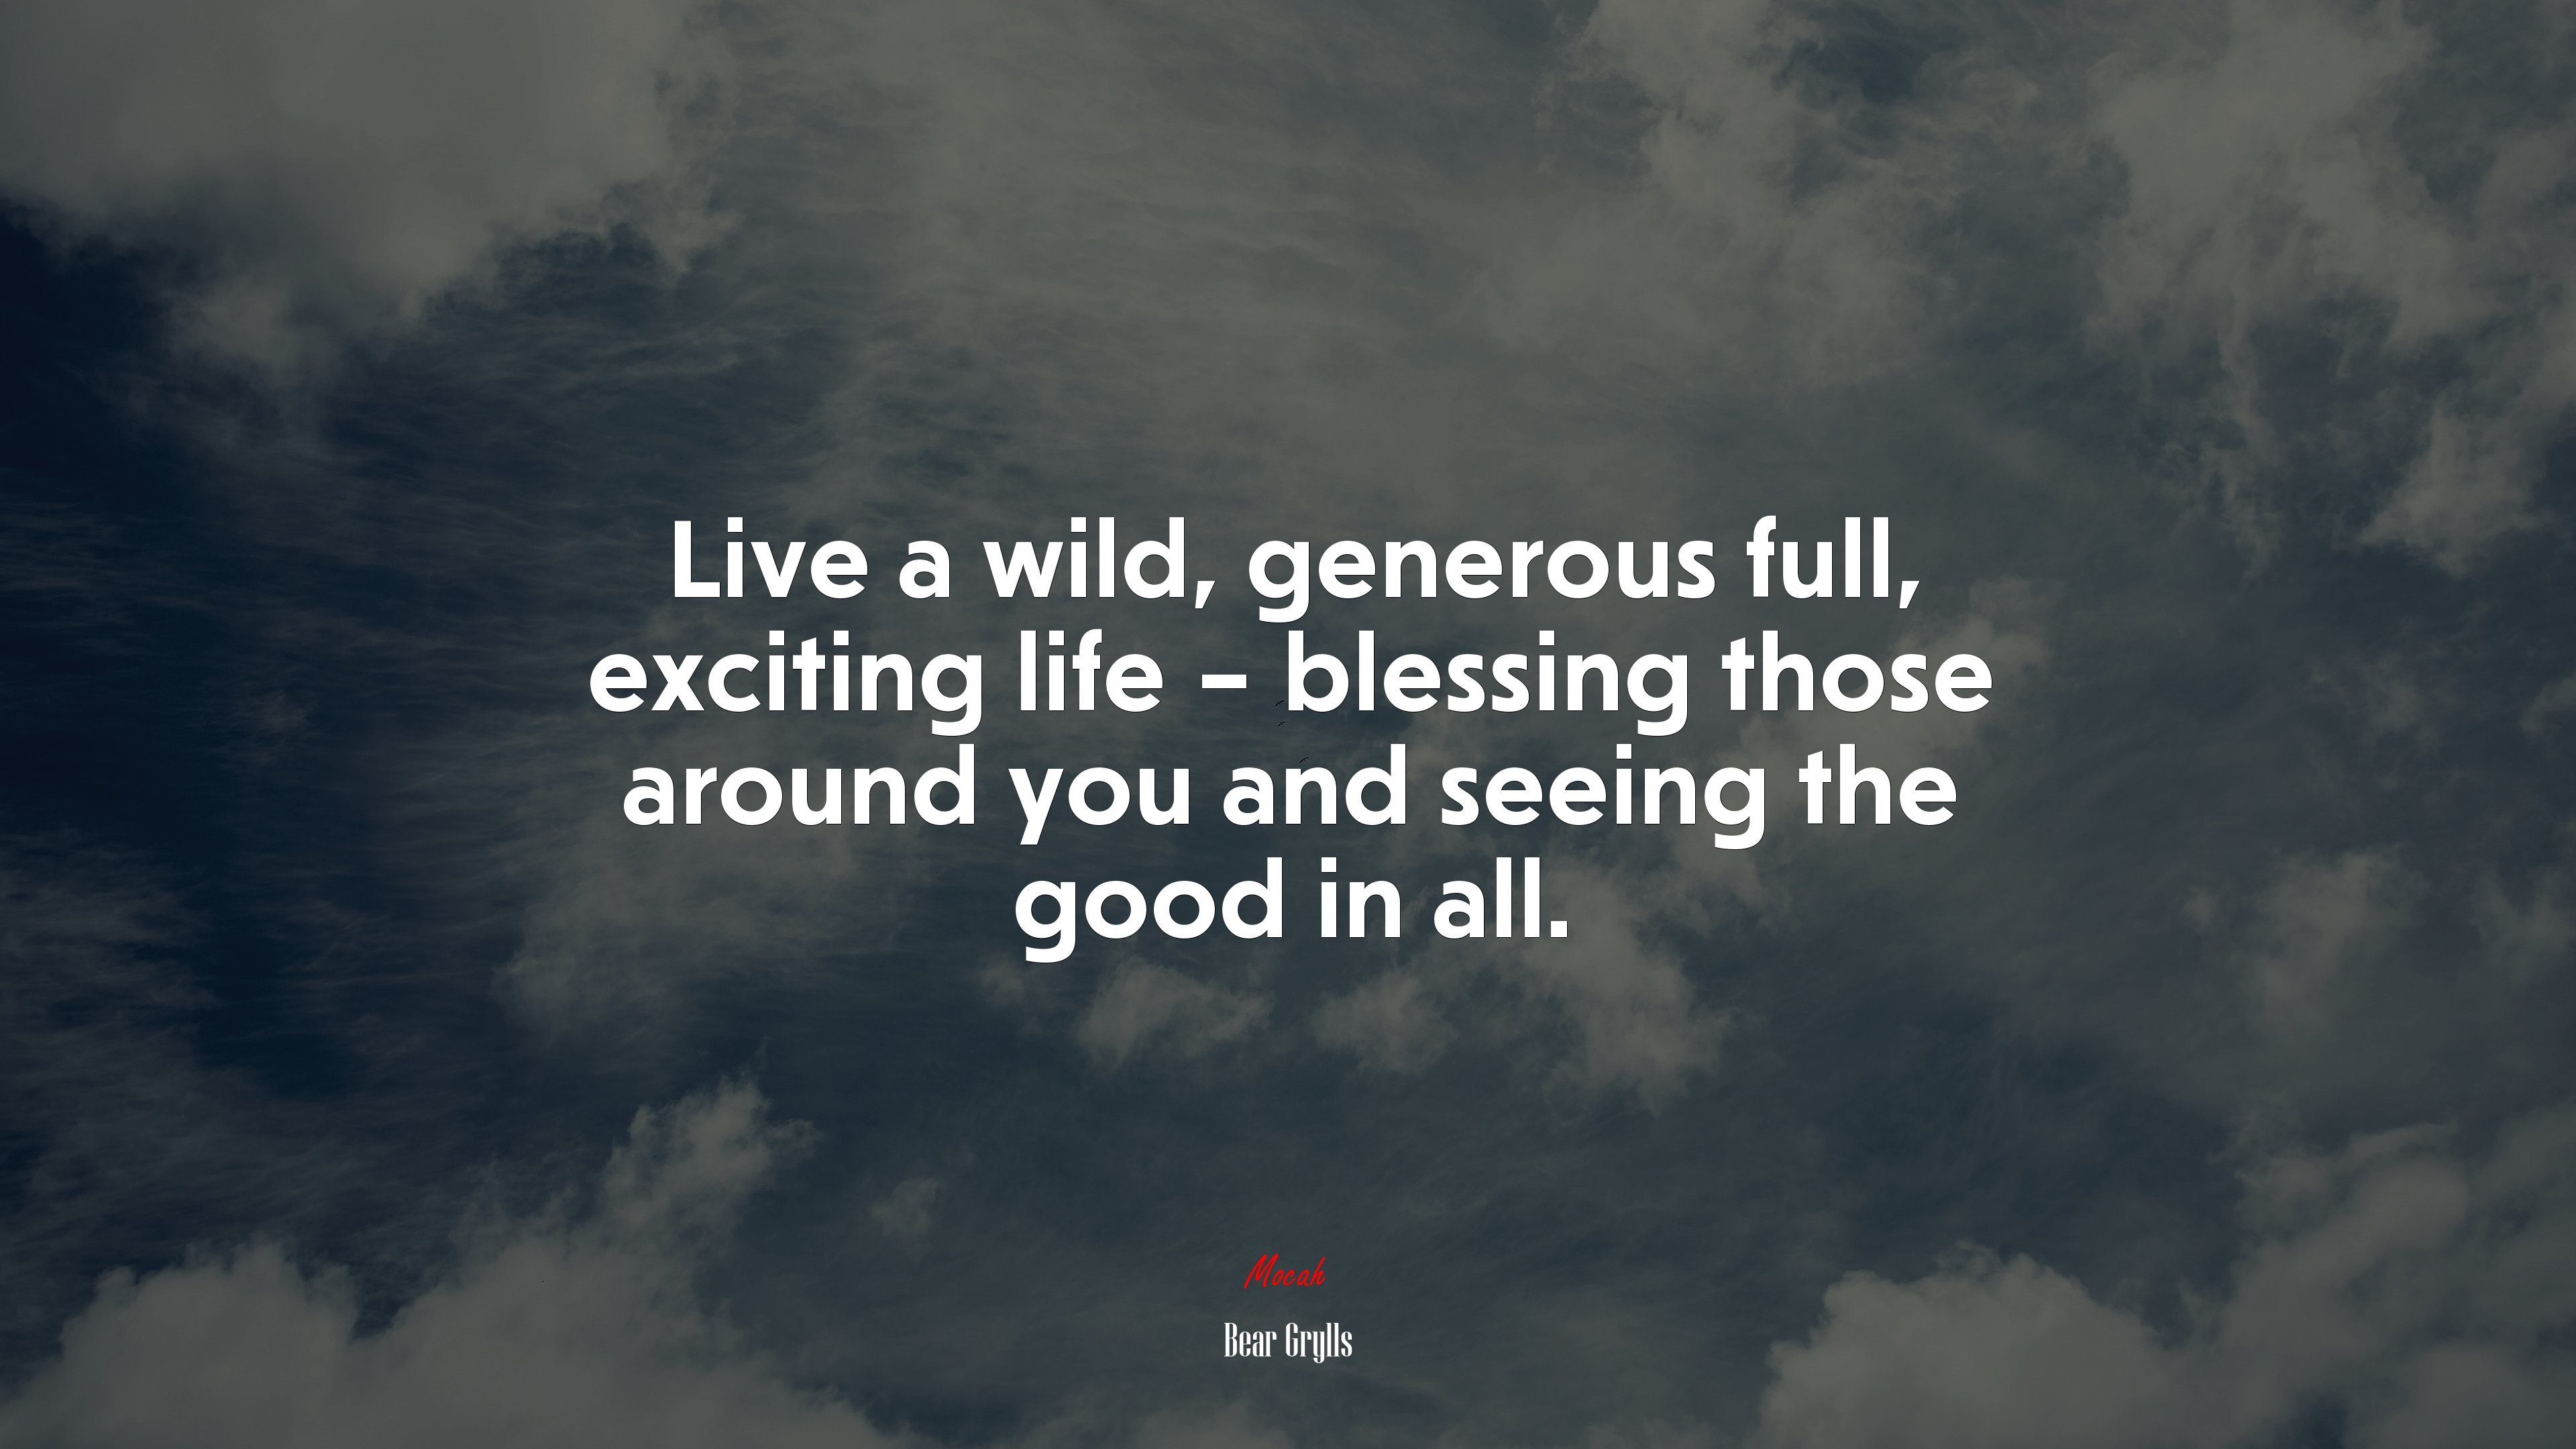 Live a wild, generous full, exciting life